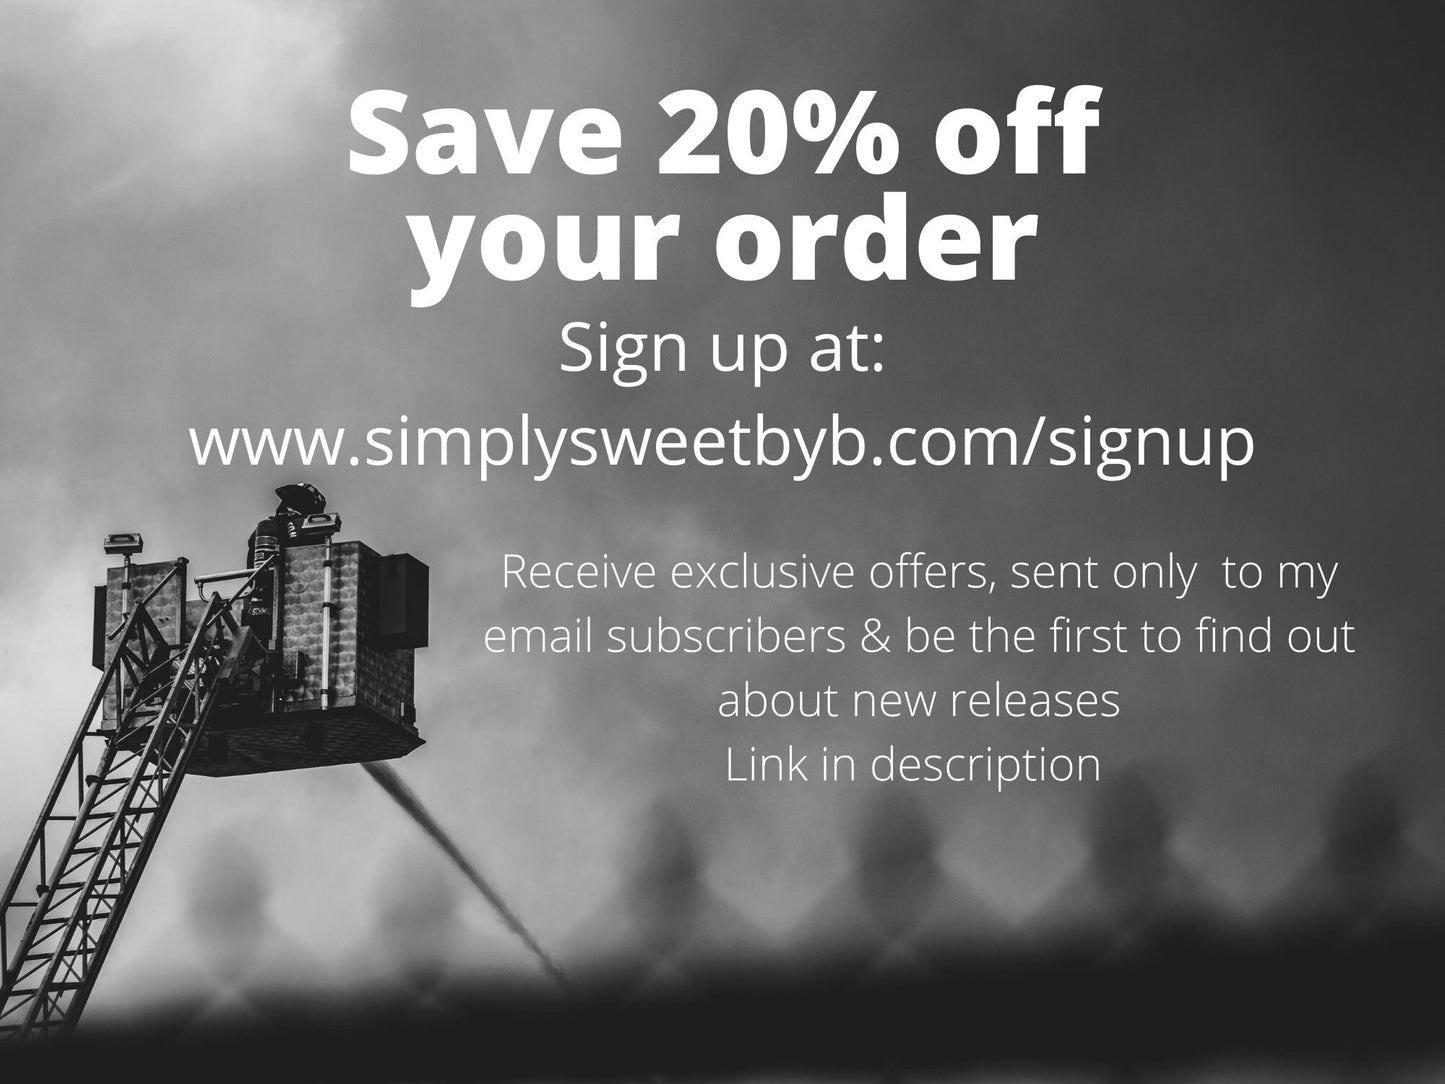 sign up for email list to receive 20% off